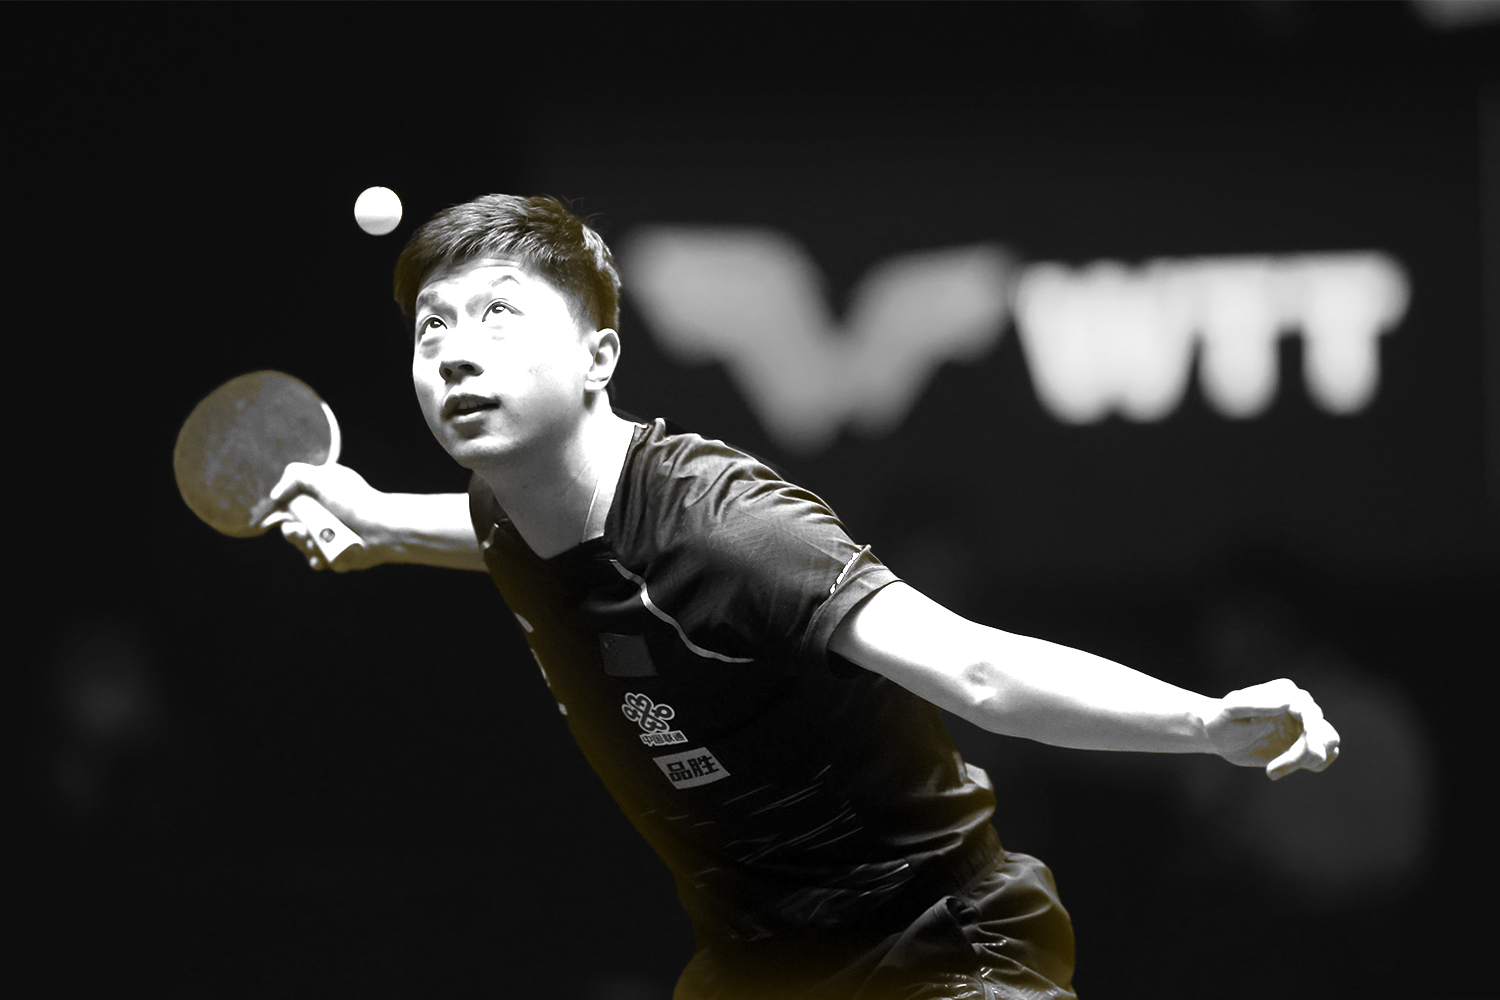 Does Table Tennis Have Potential to Become a Billion-Dollar Sport?